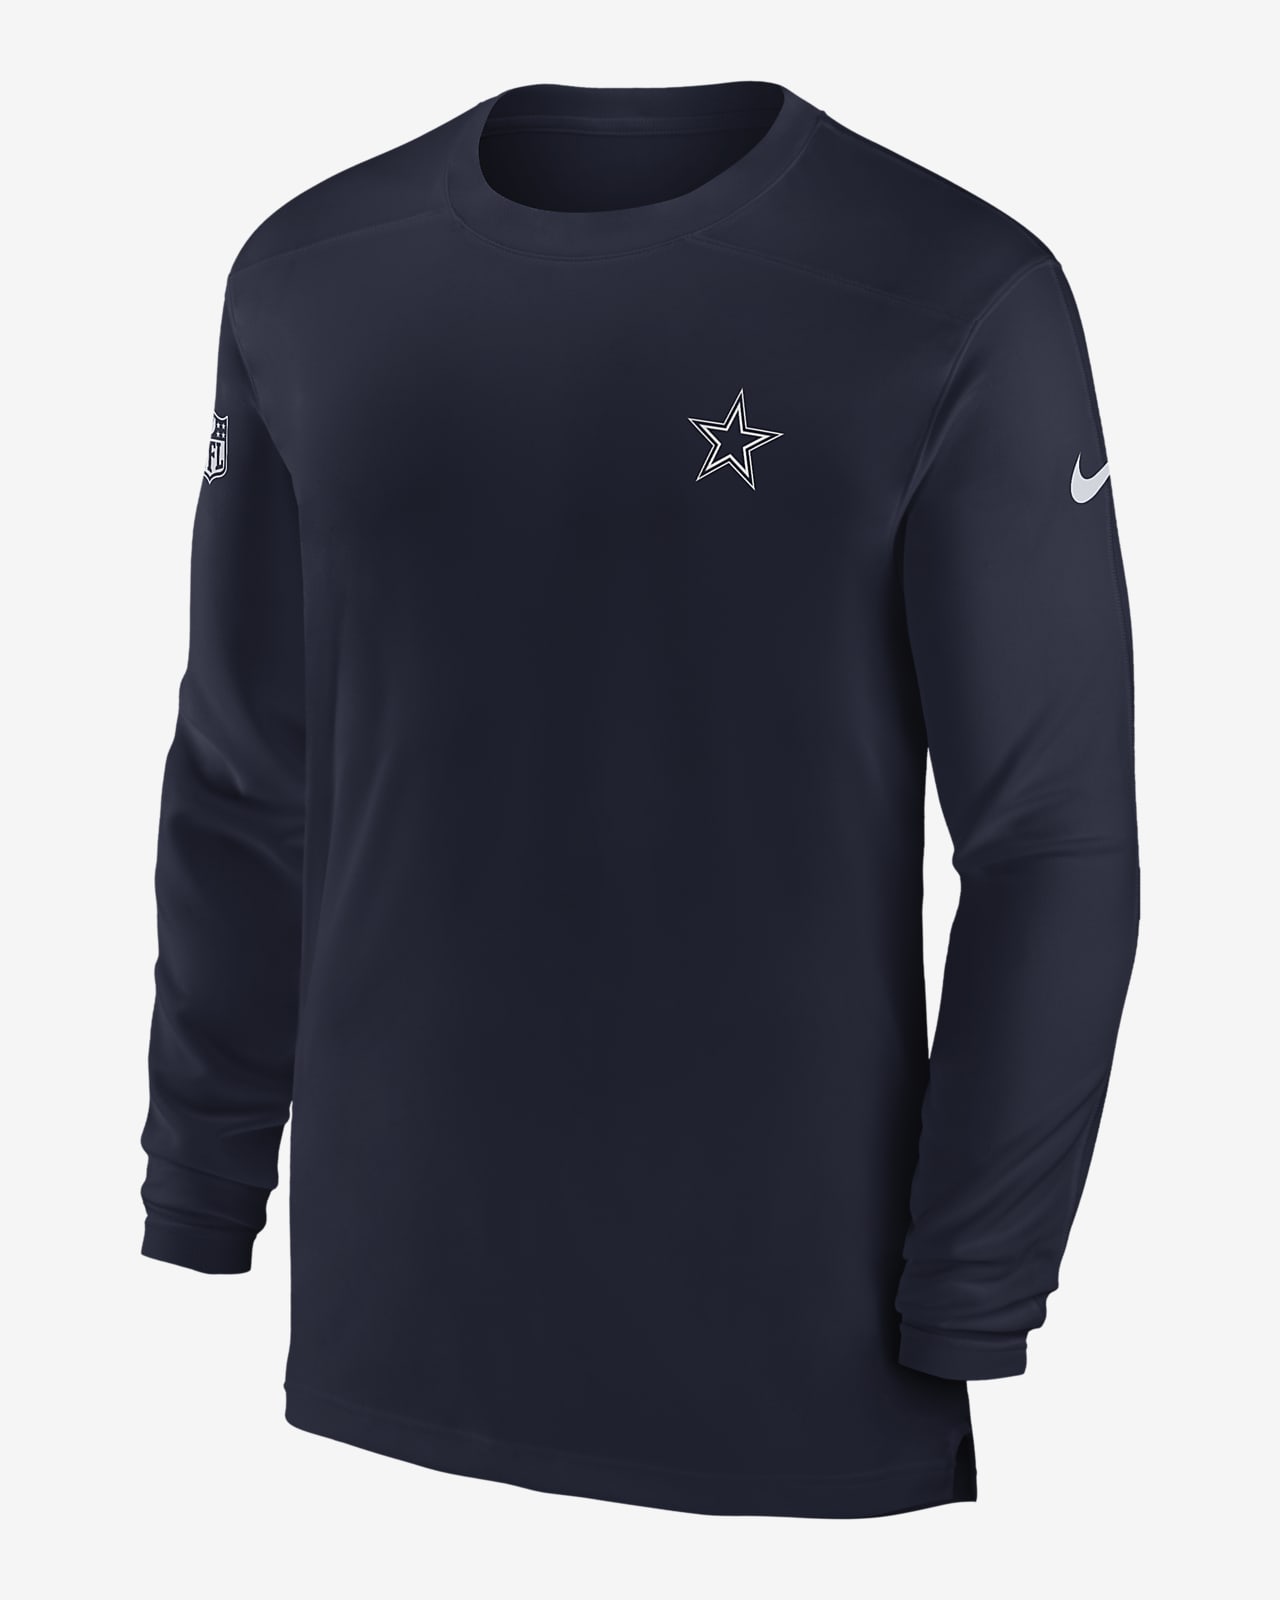  NFL Dallas Cowboys Mens Scrum Tee, NAVY, Small : Sports &  Outdoors